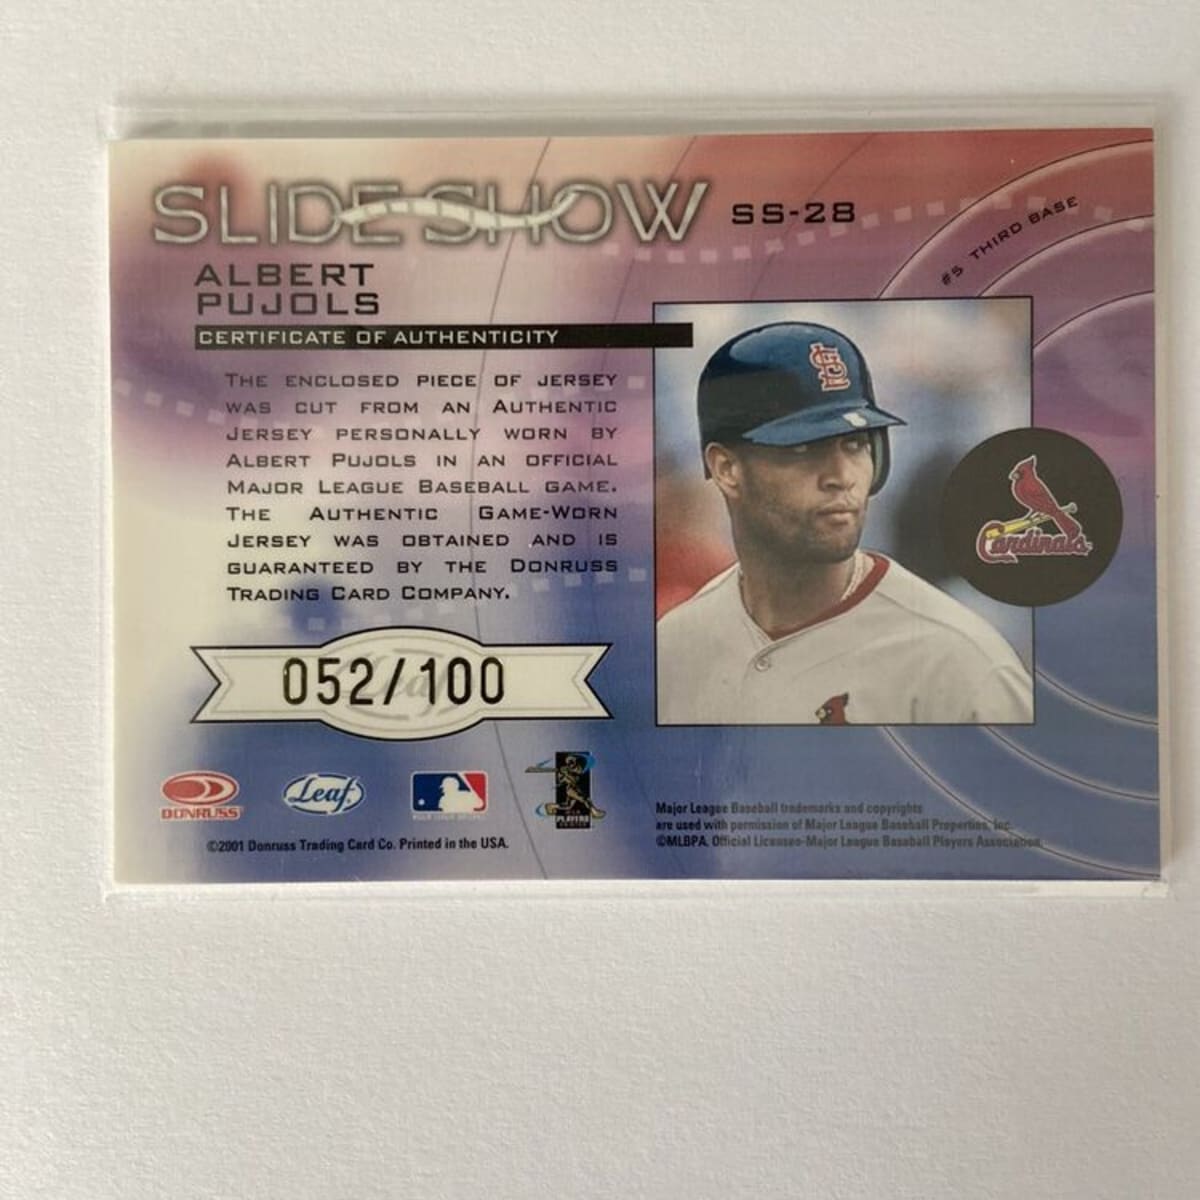 Albert Pujols Sports Card Sets New Record with $5,000 List Price